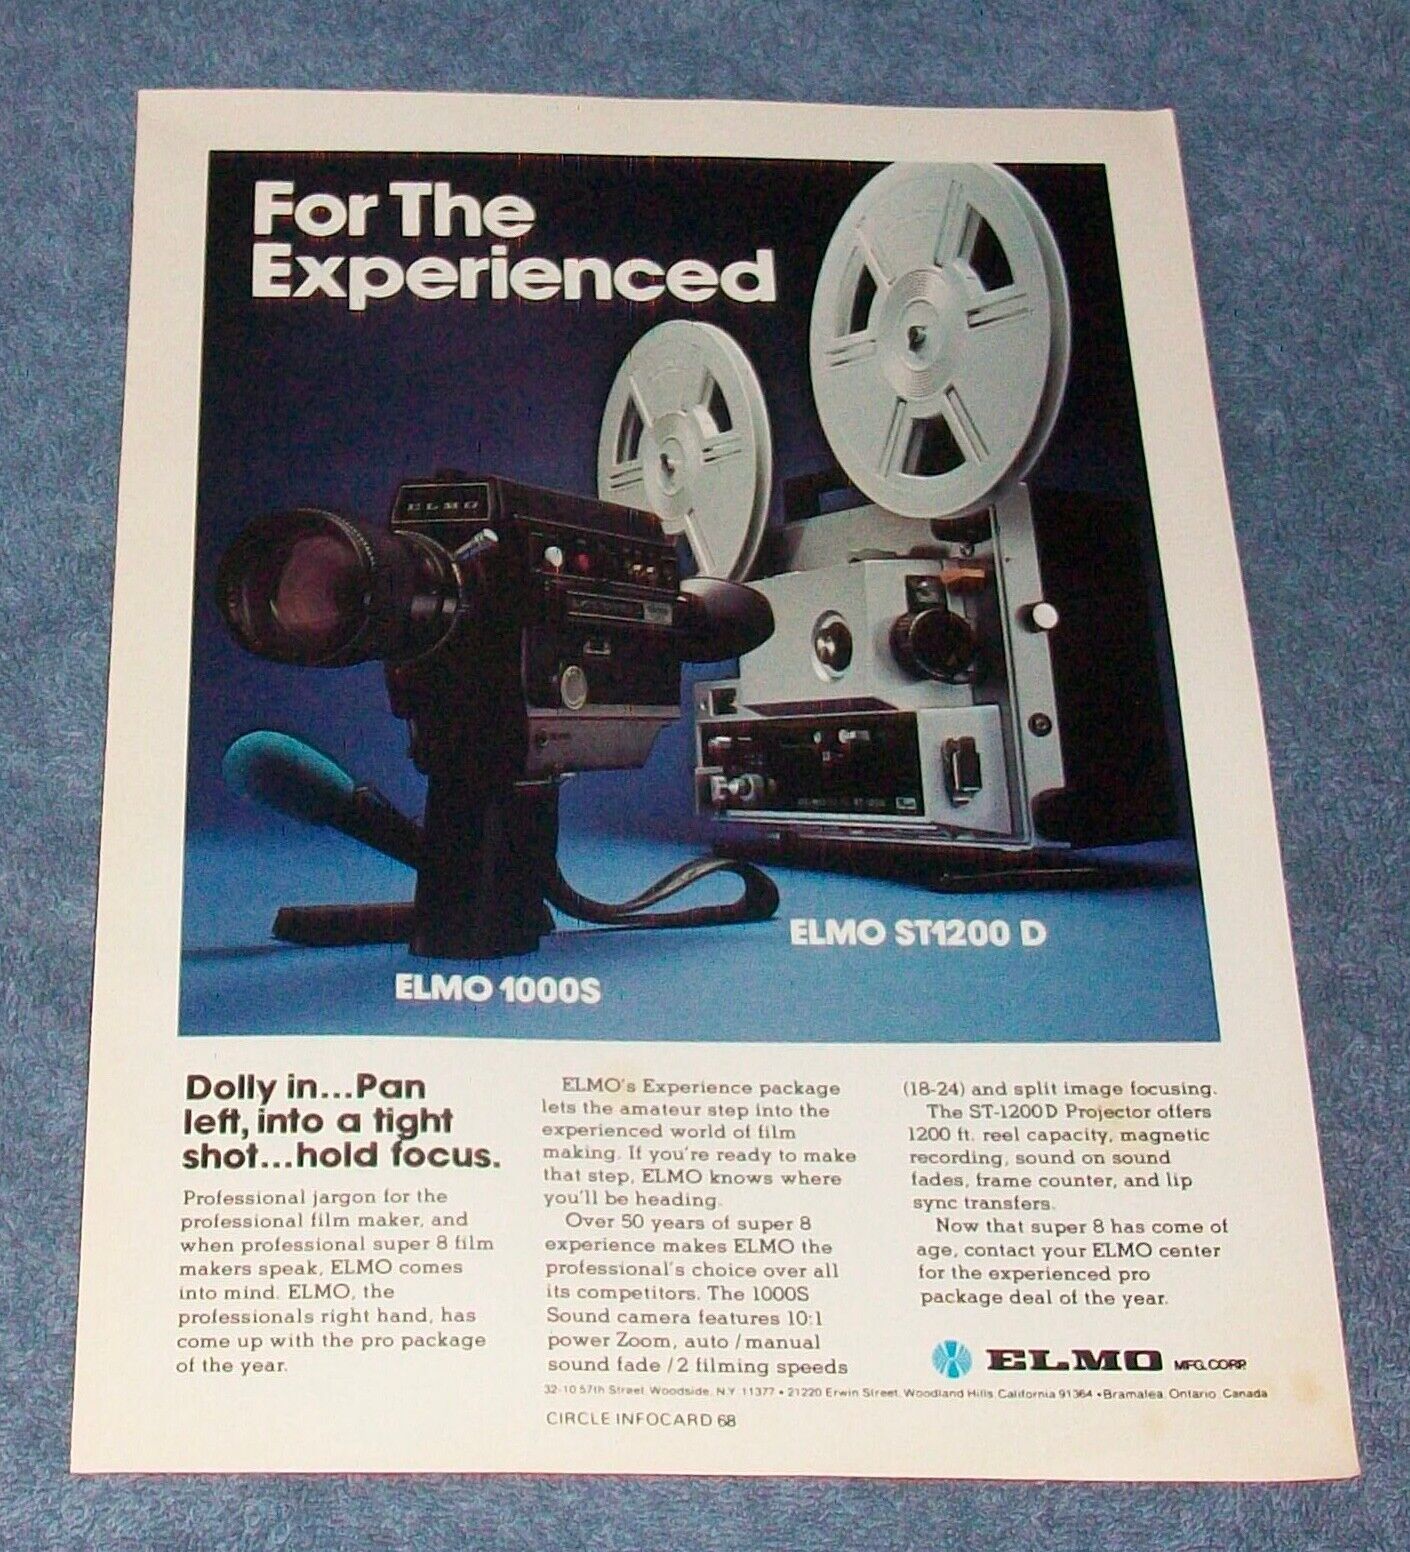 1977 Elmo Super 8 1000S Sound Camera and ST1200D Projector Vintage Ad